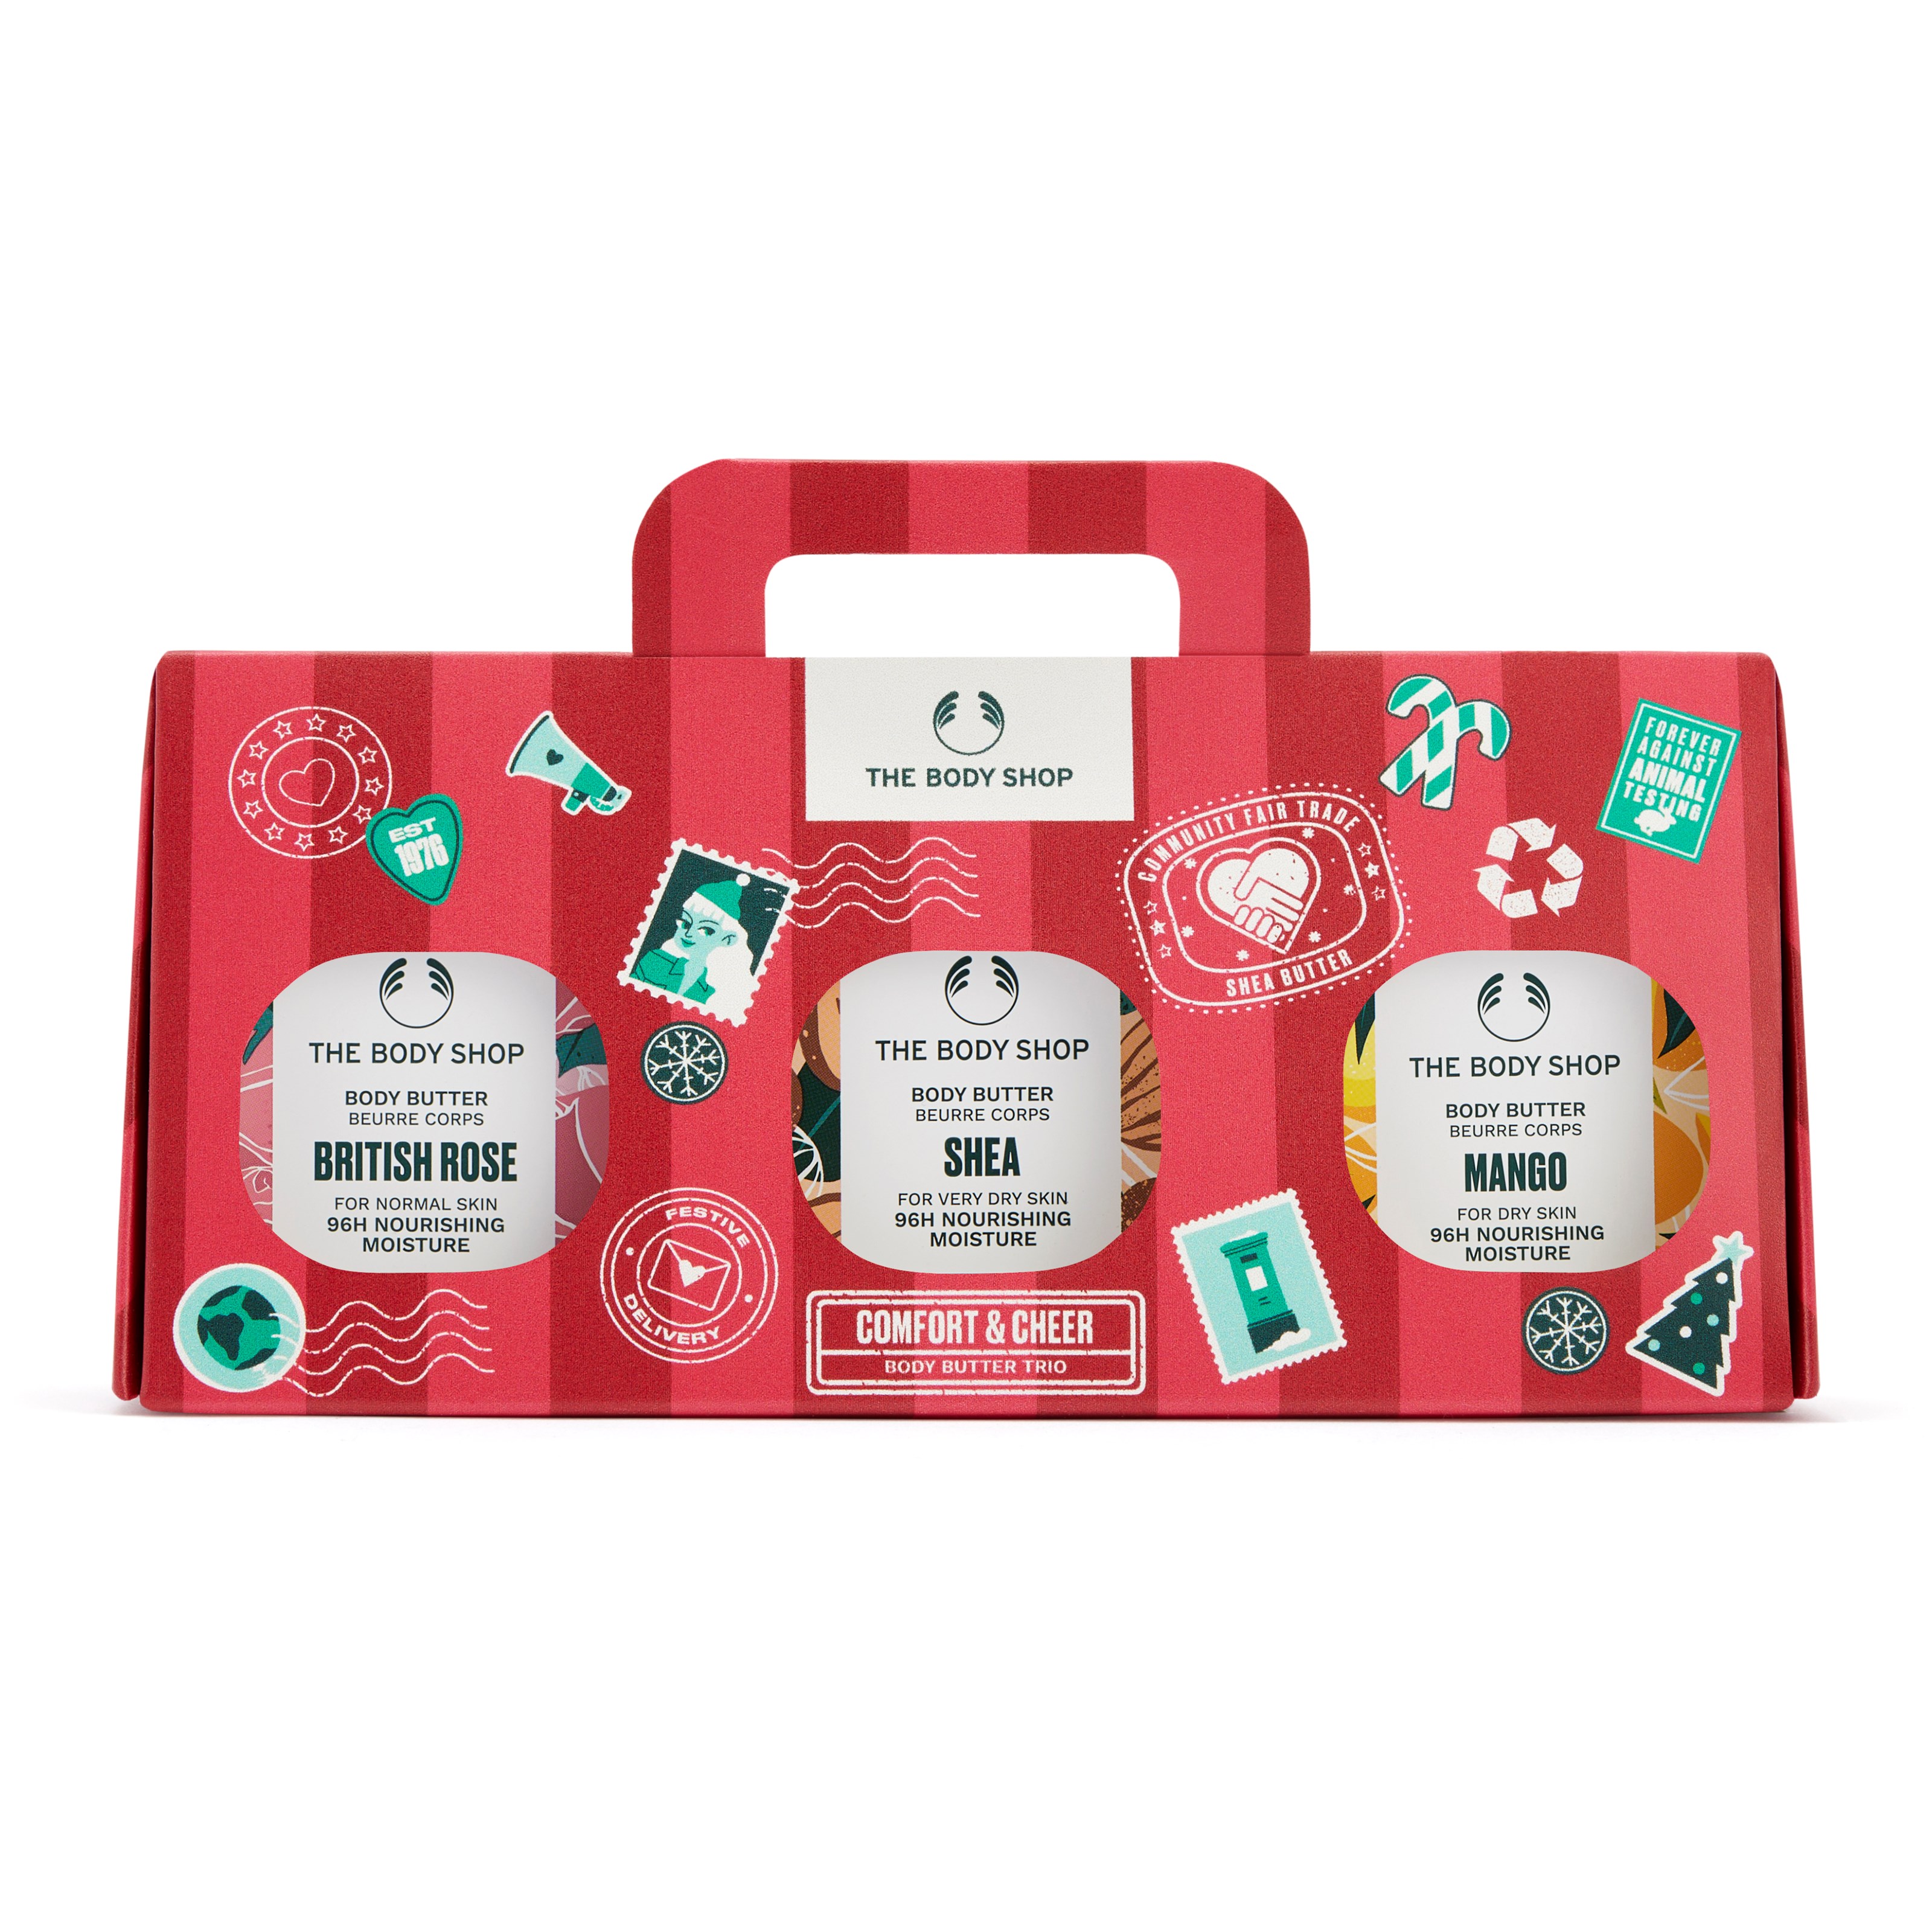 The Body Shop Comfort & Cheer Christmas Body Butter Trio